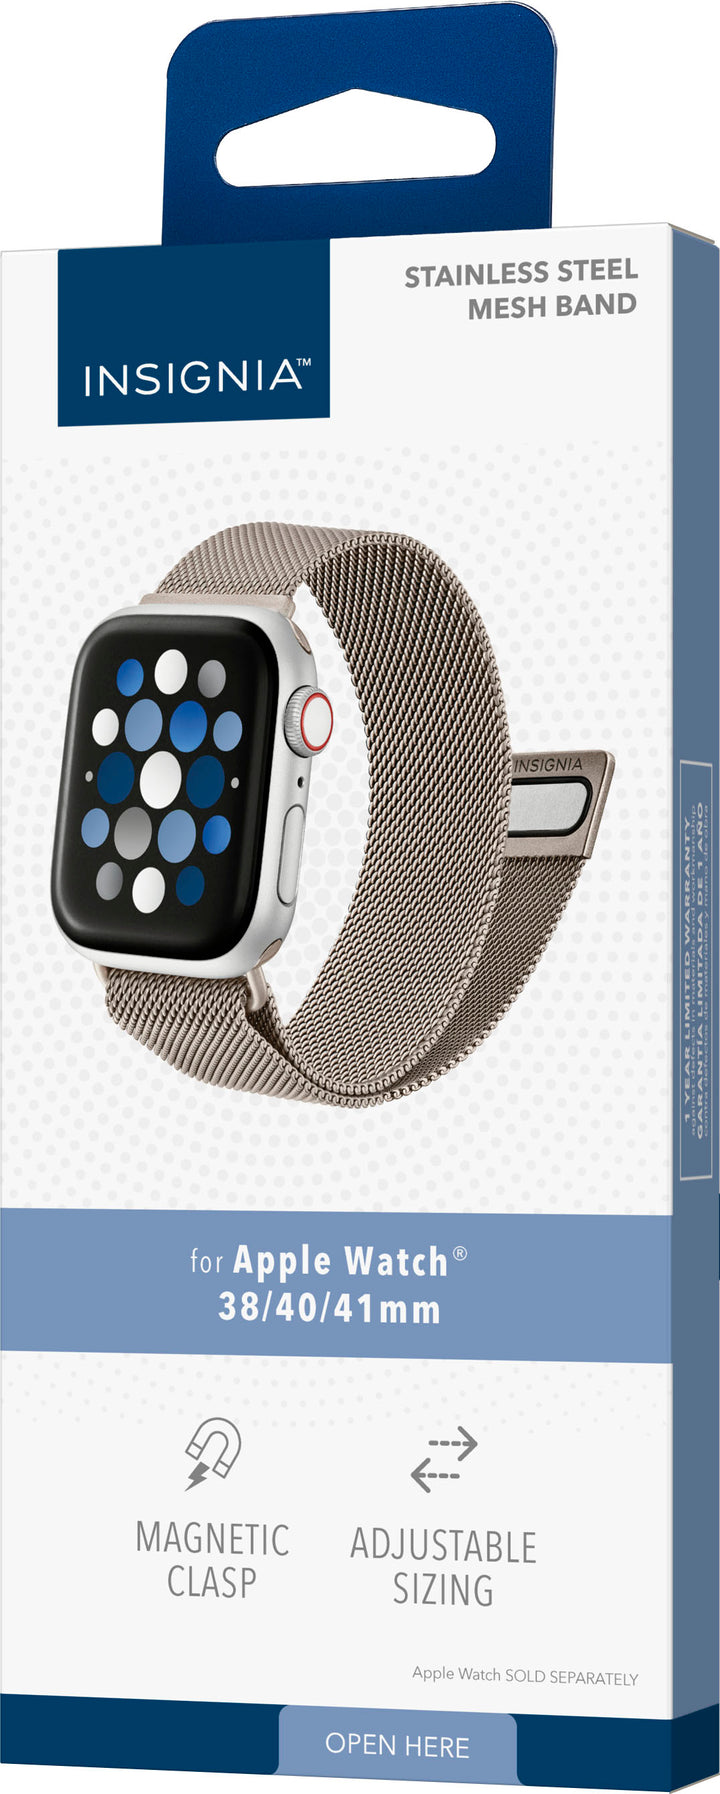 Insignia™ - Stainless Steel Mesh Band for Apple Watch 38mm, 40mm, 41mm and SE - Champagne_7